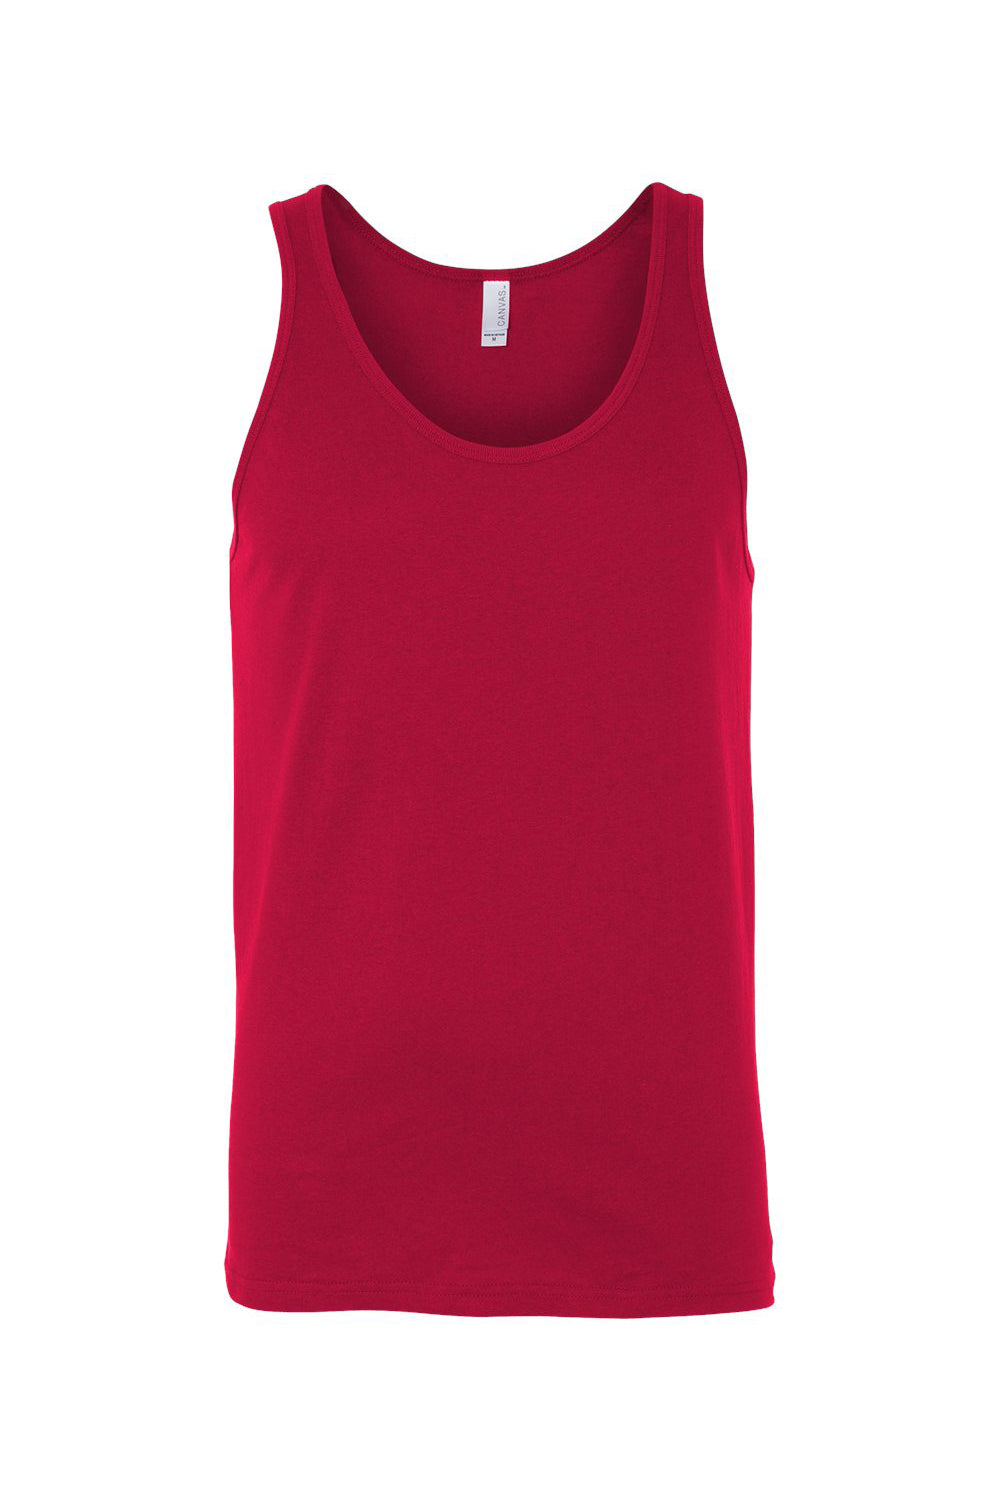 Bella + Canvas BC3480/3480 Mens Jersey Tank Top Red Flat Front